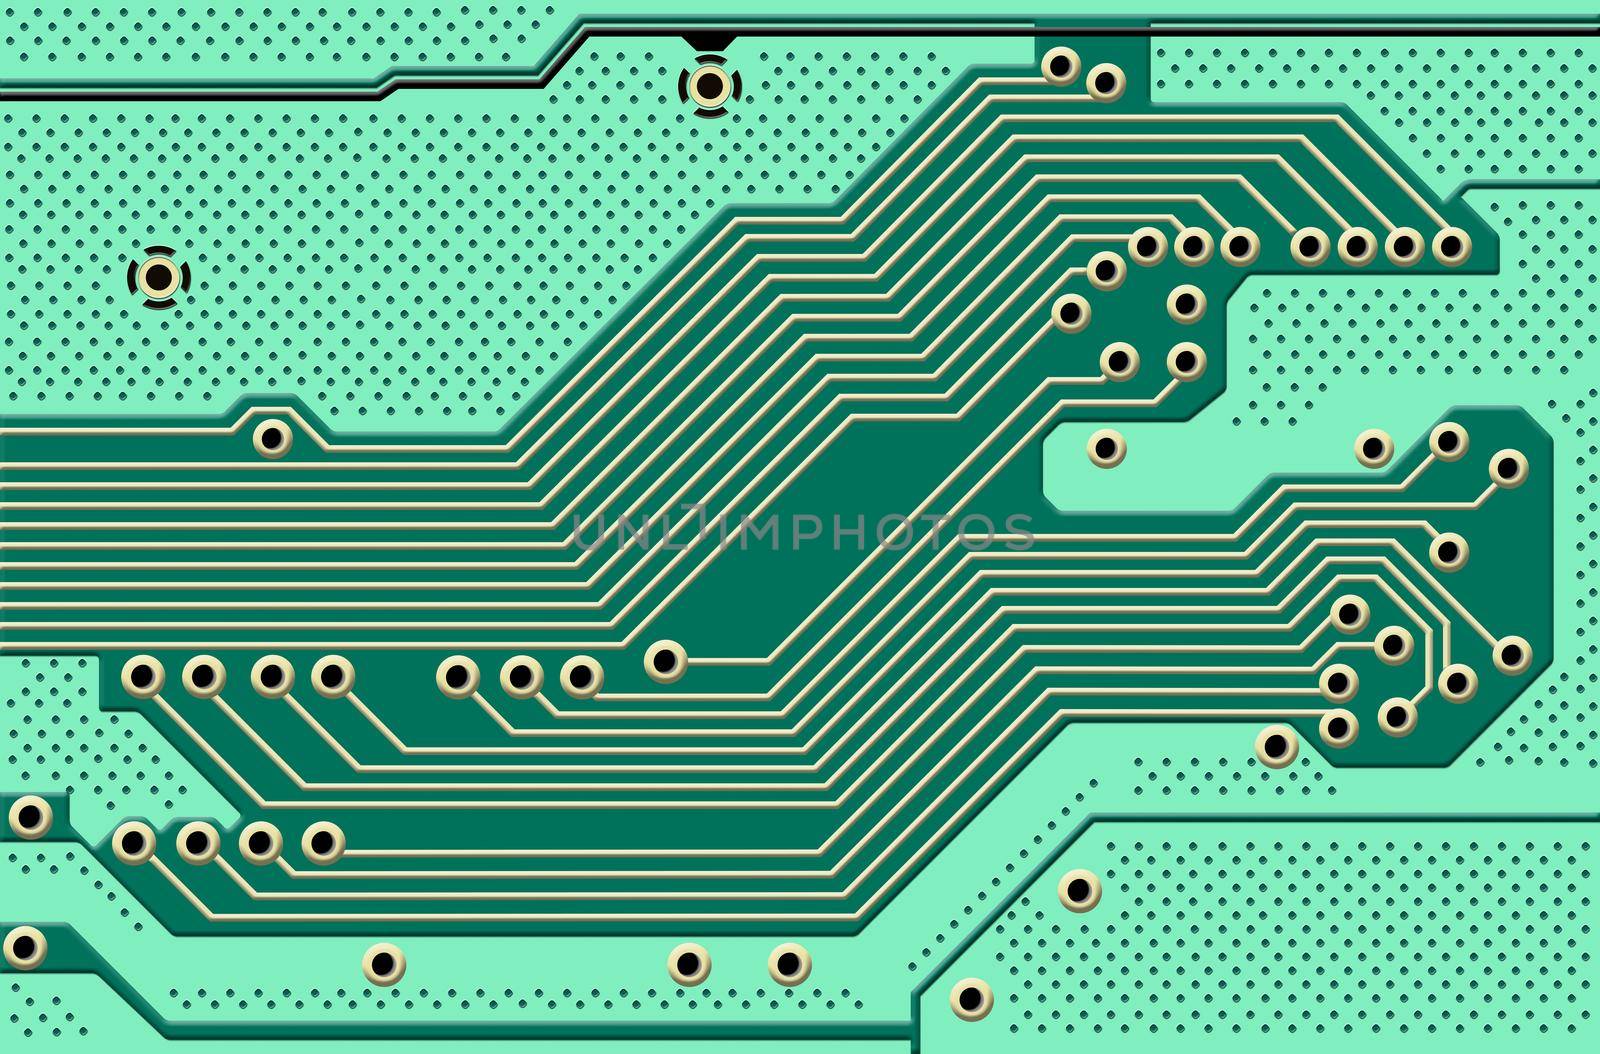 Printed circuit board by Mibuch